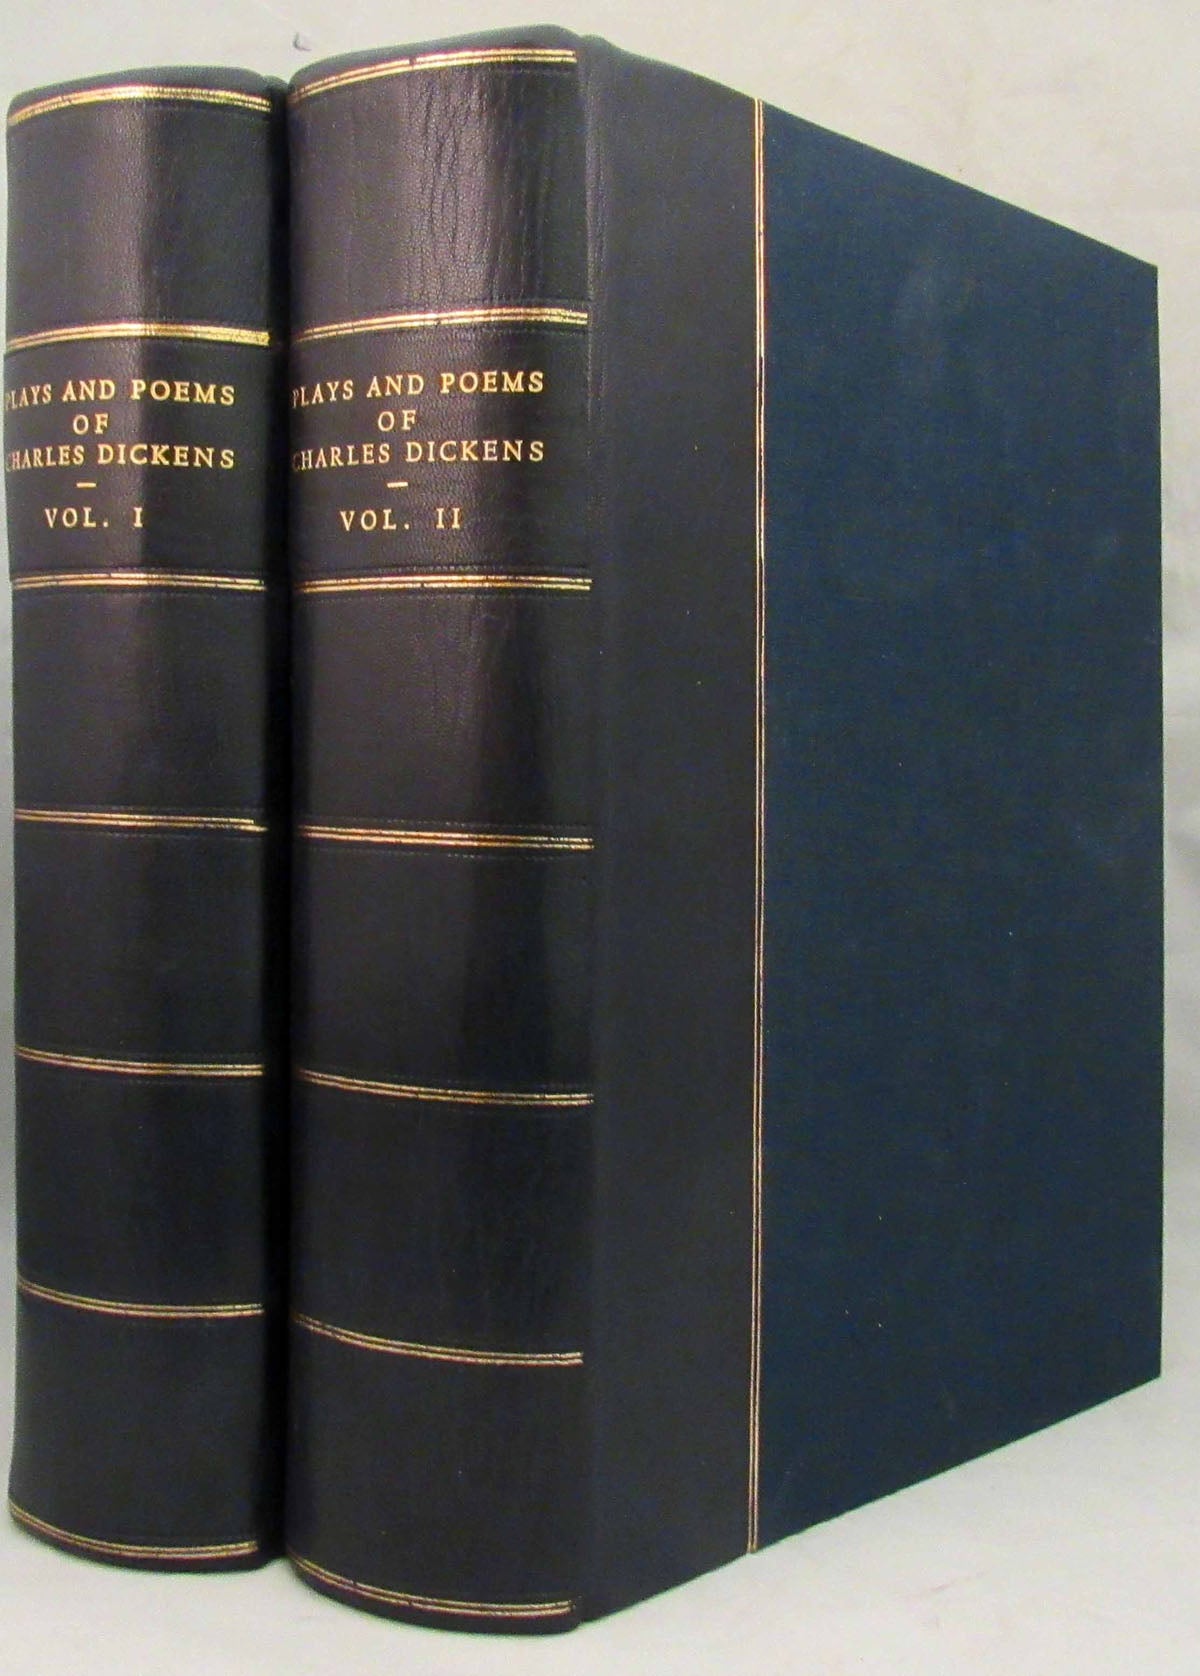 Item #30499 THE PLAYS AND POEMS OF CHARLES DICKENS With a Few Miscellanies in Prose Now First Collected. Edited Prefaced and Annotated by Richard Herne Shepherd. Charles Dickens.